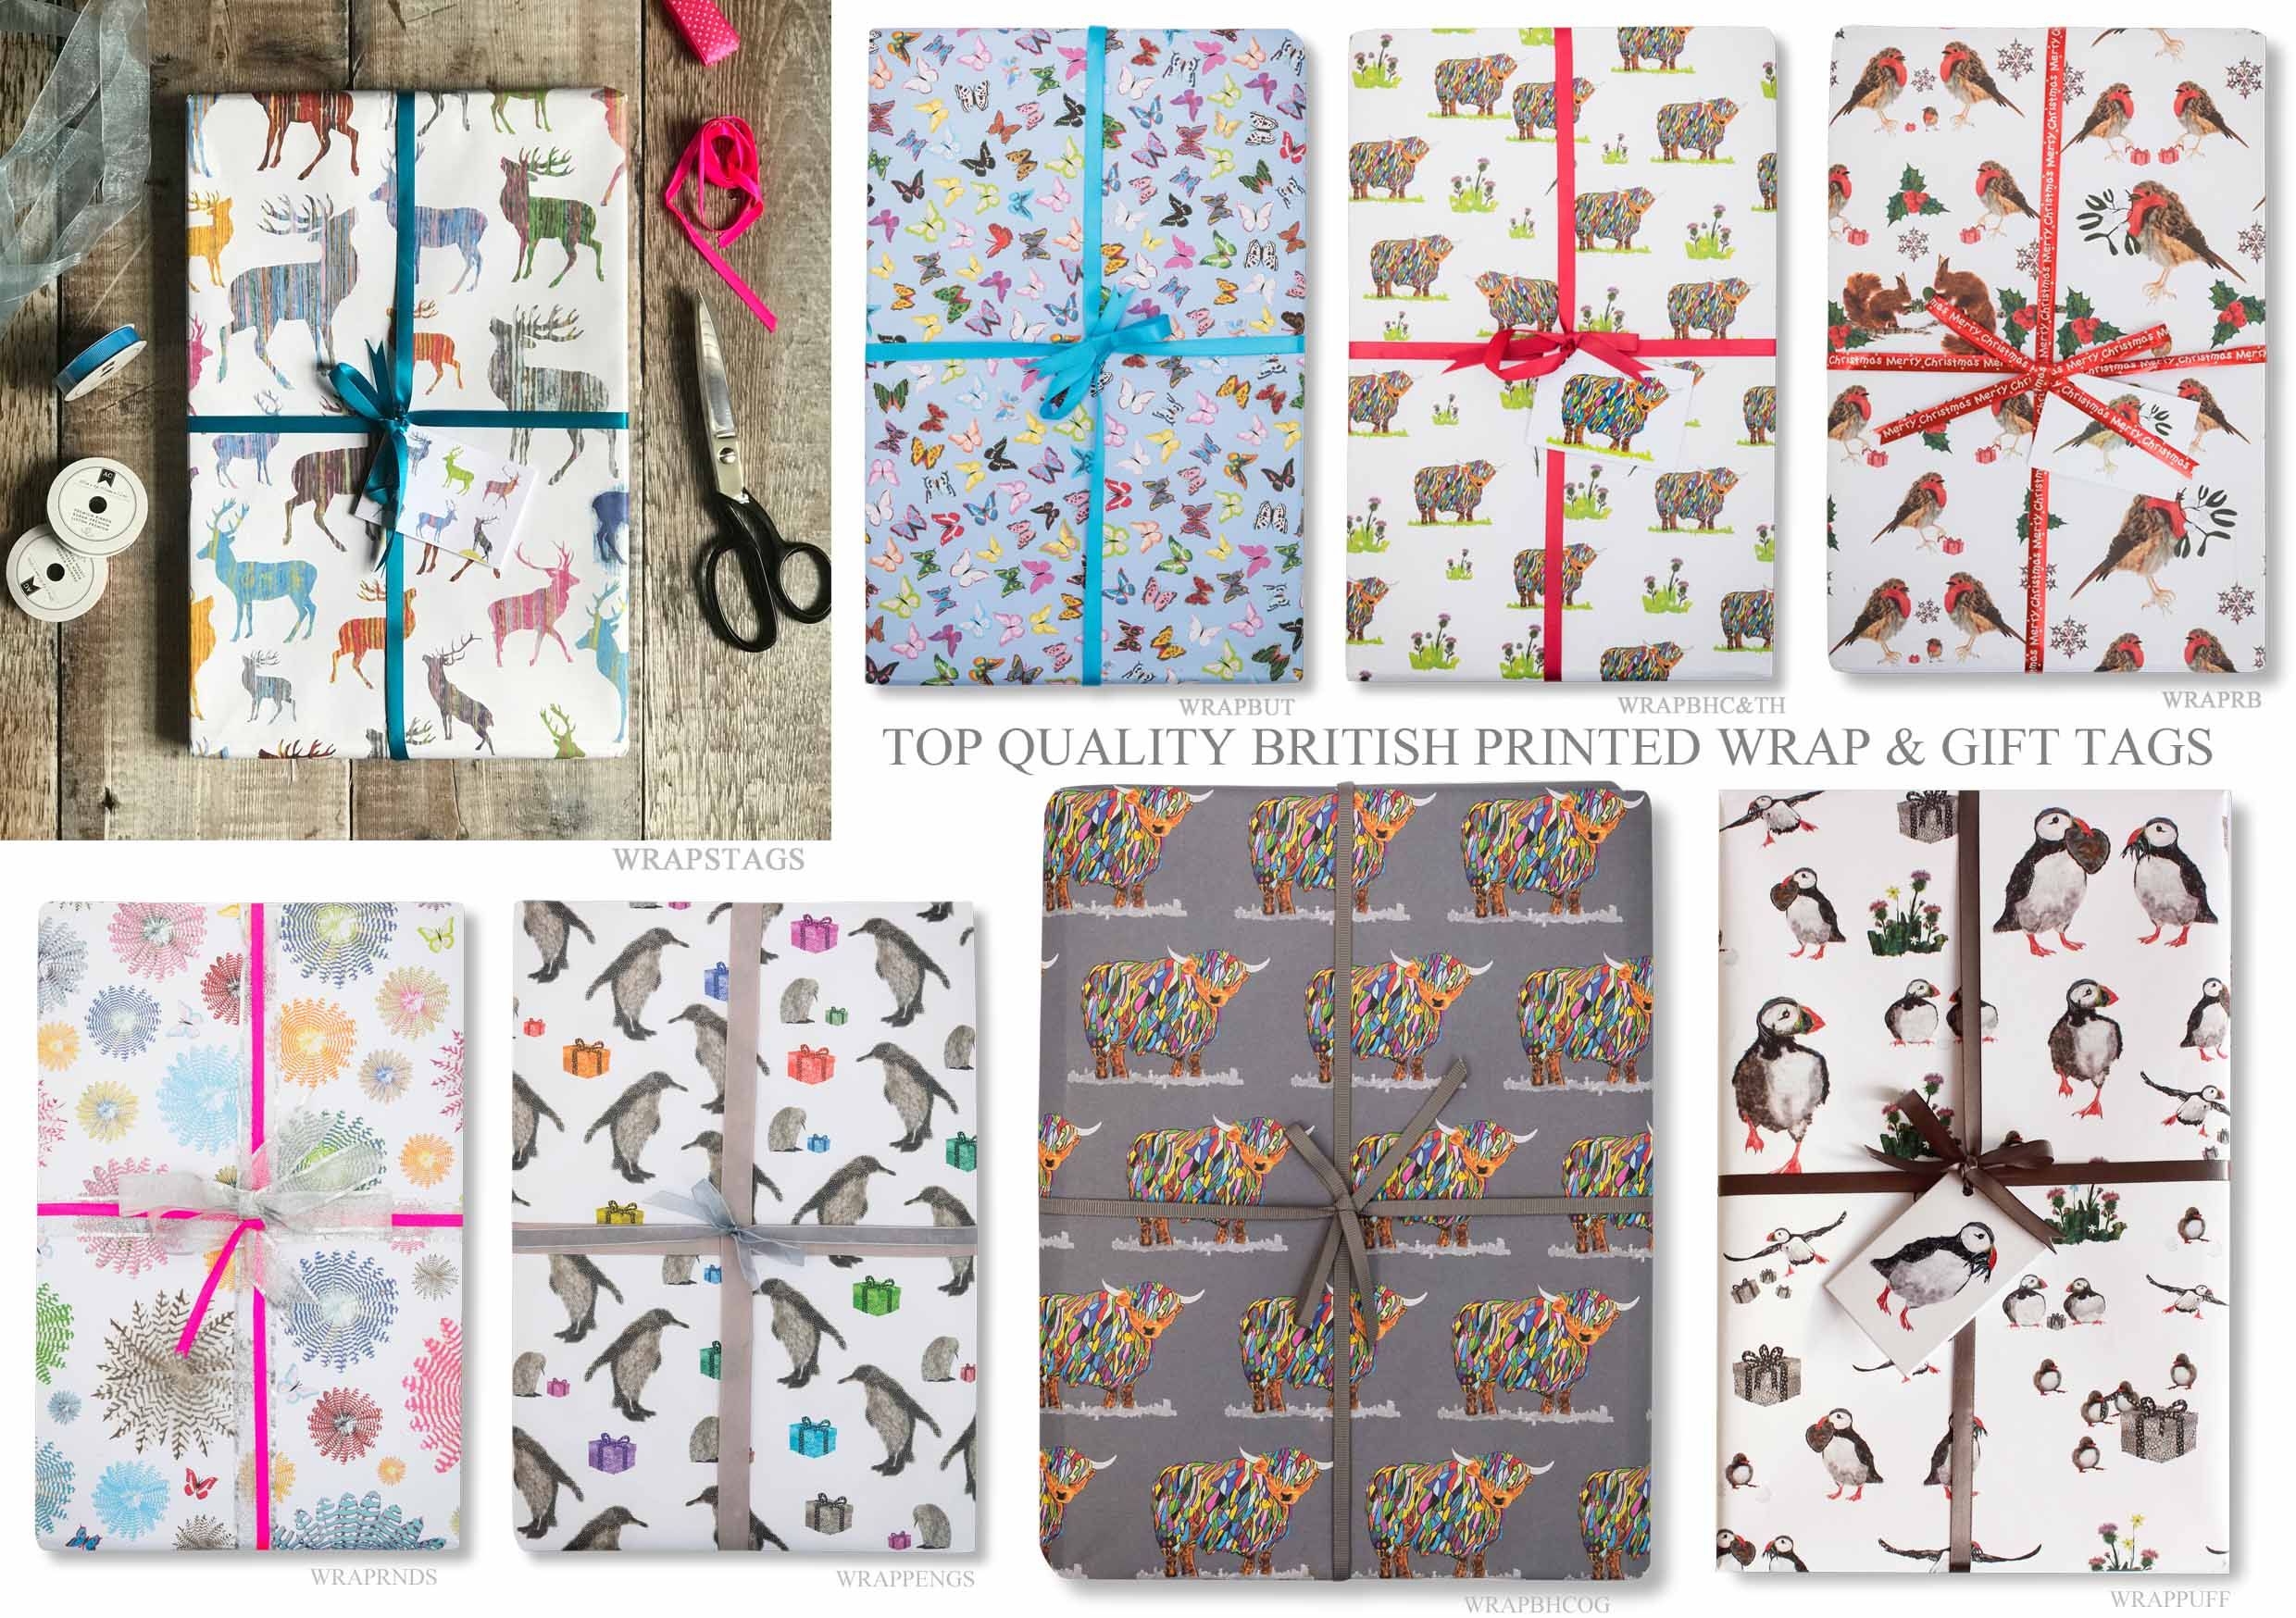 WRAPPING PAPER OFFER